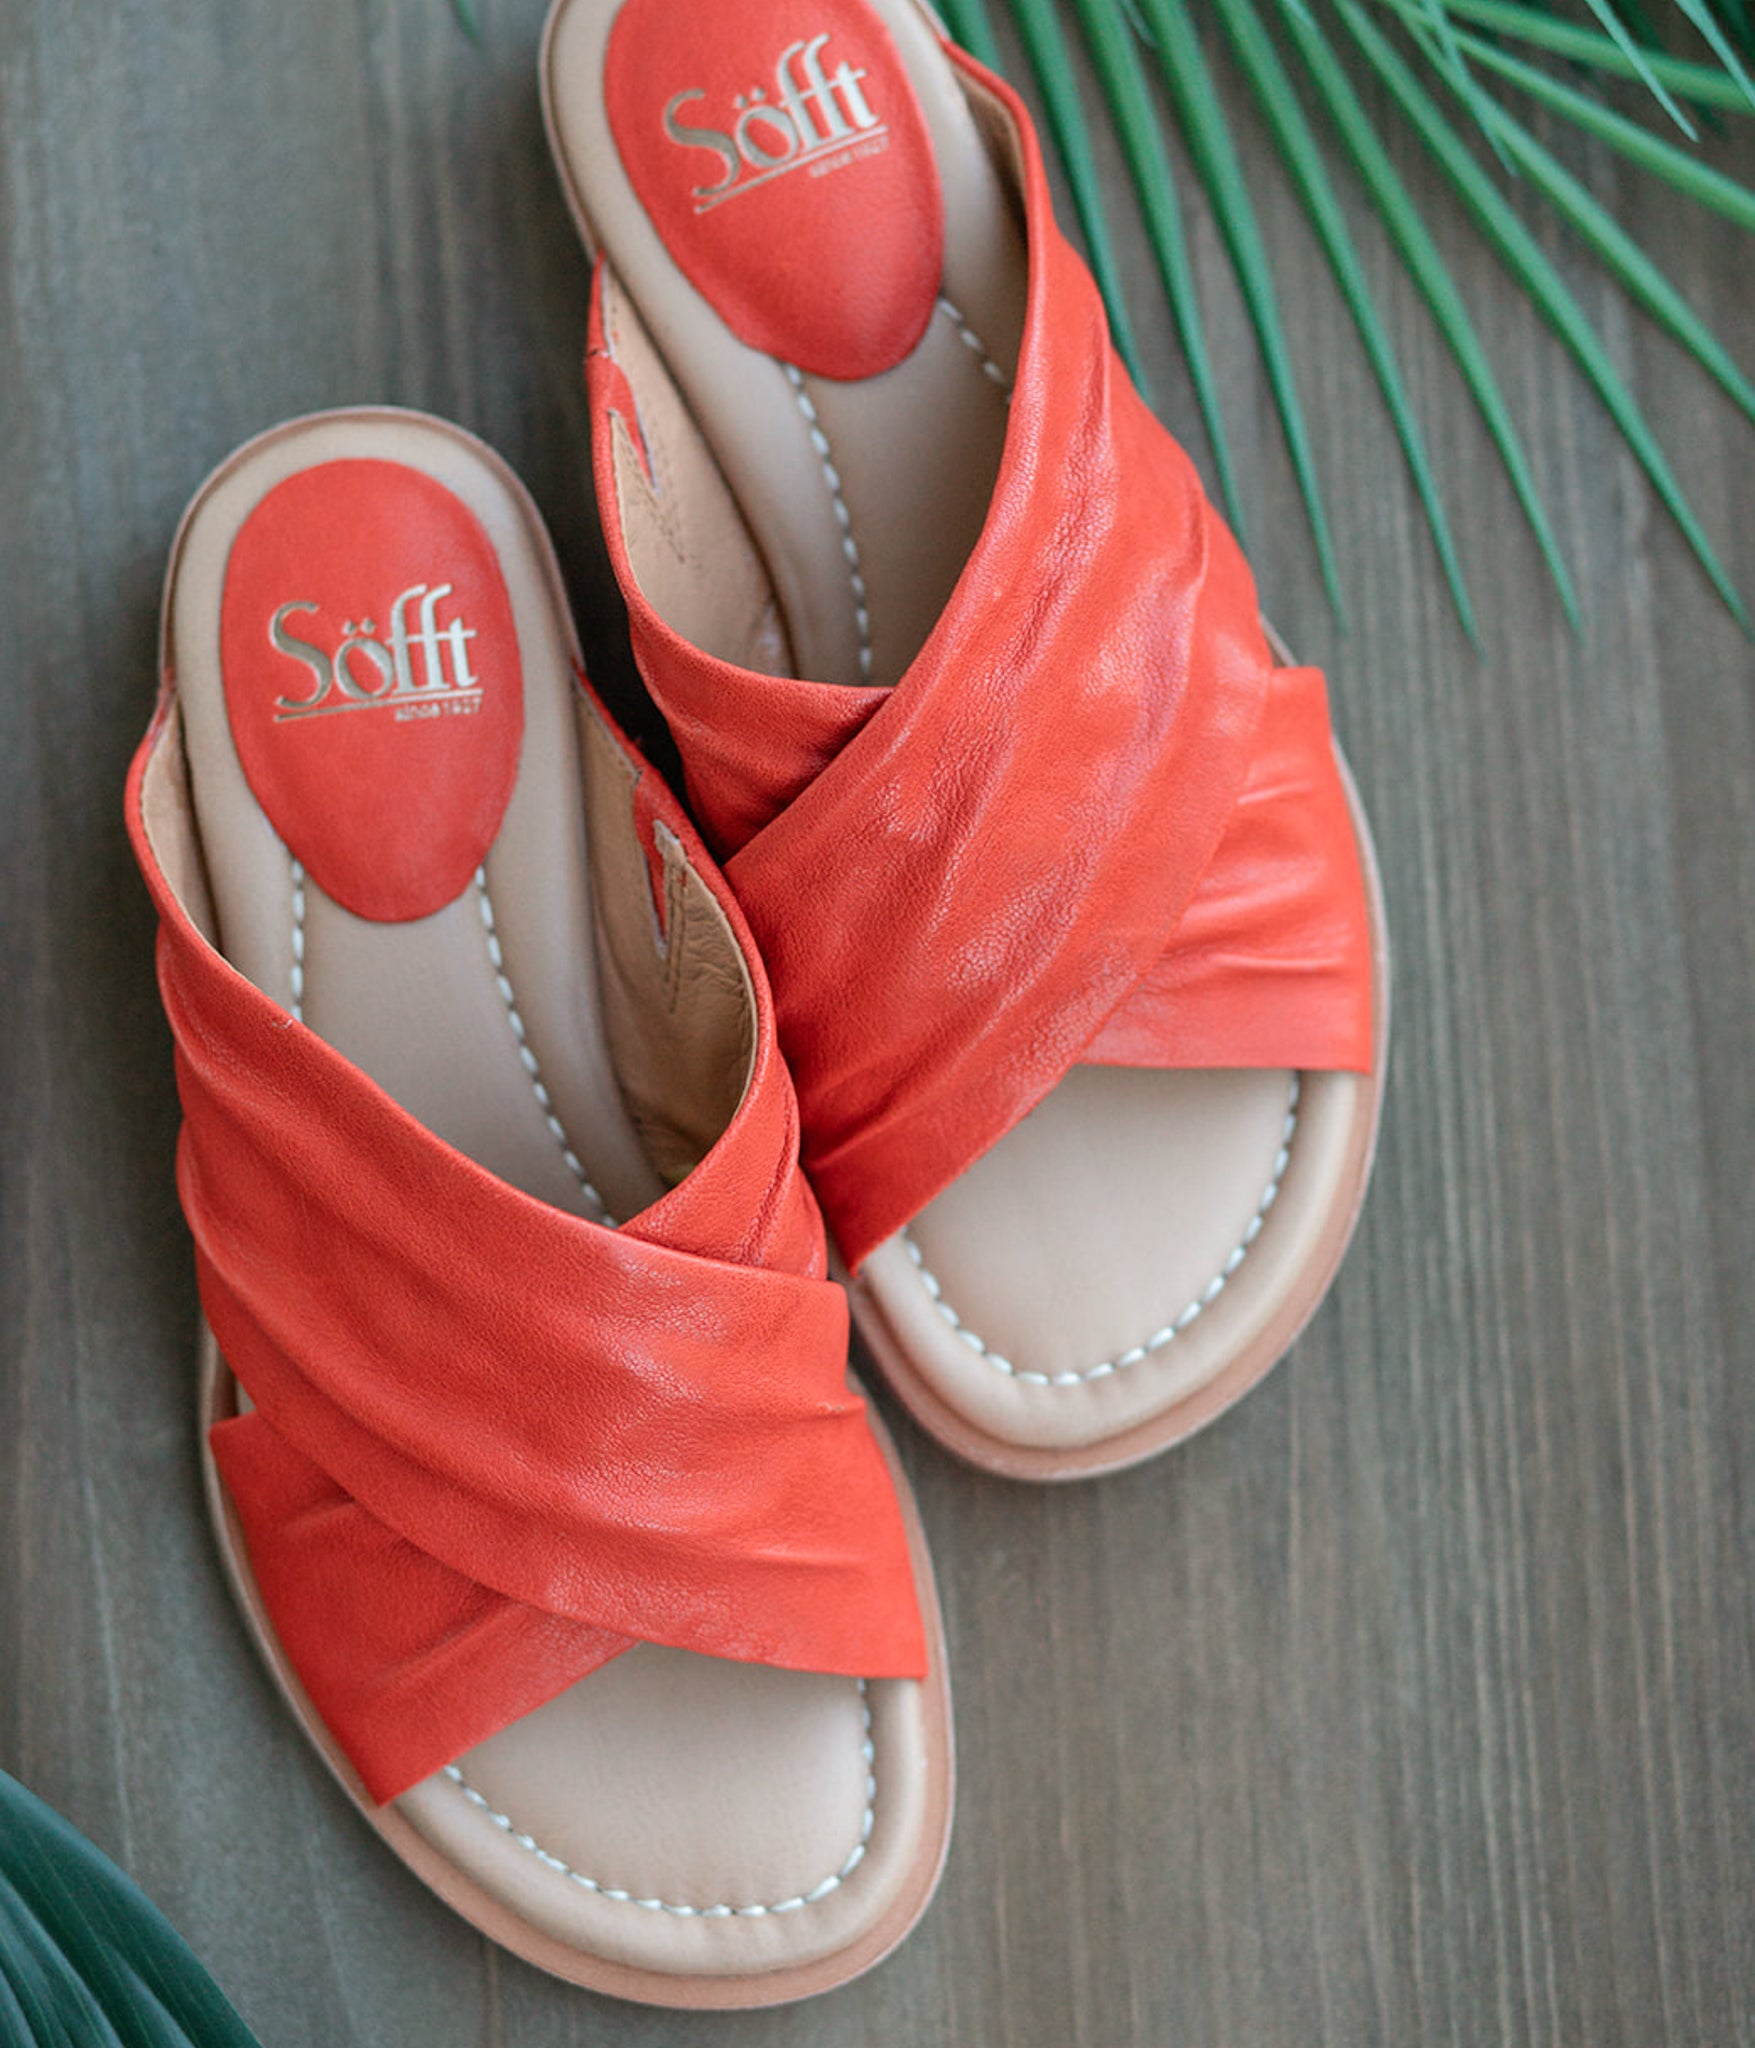 Fallon Leather Slide Sandal in Coral by Sofft Shoes